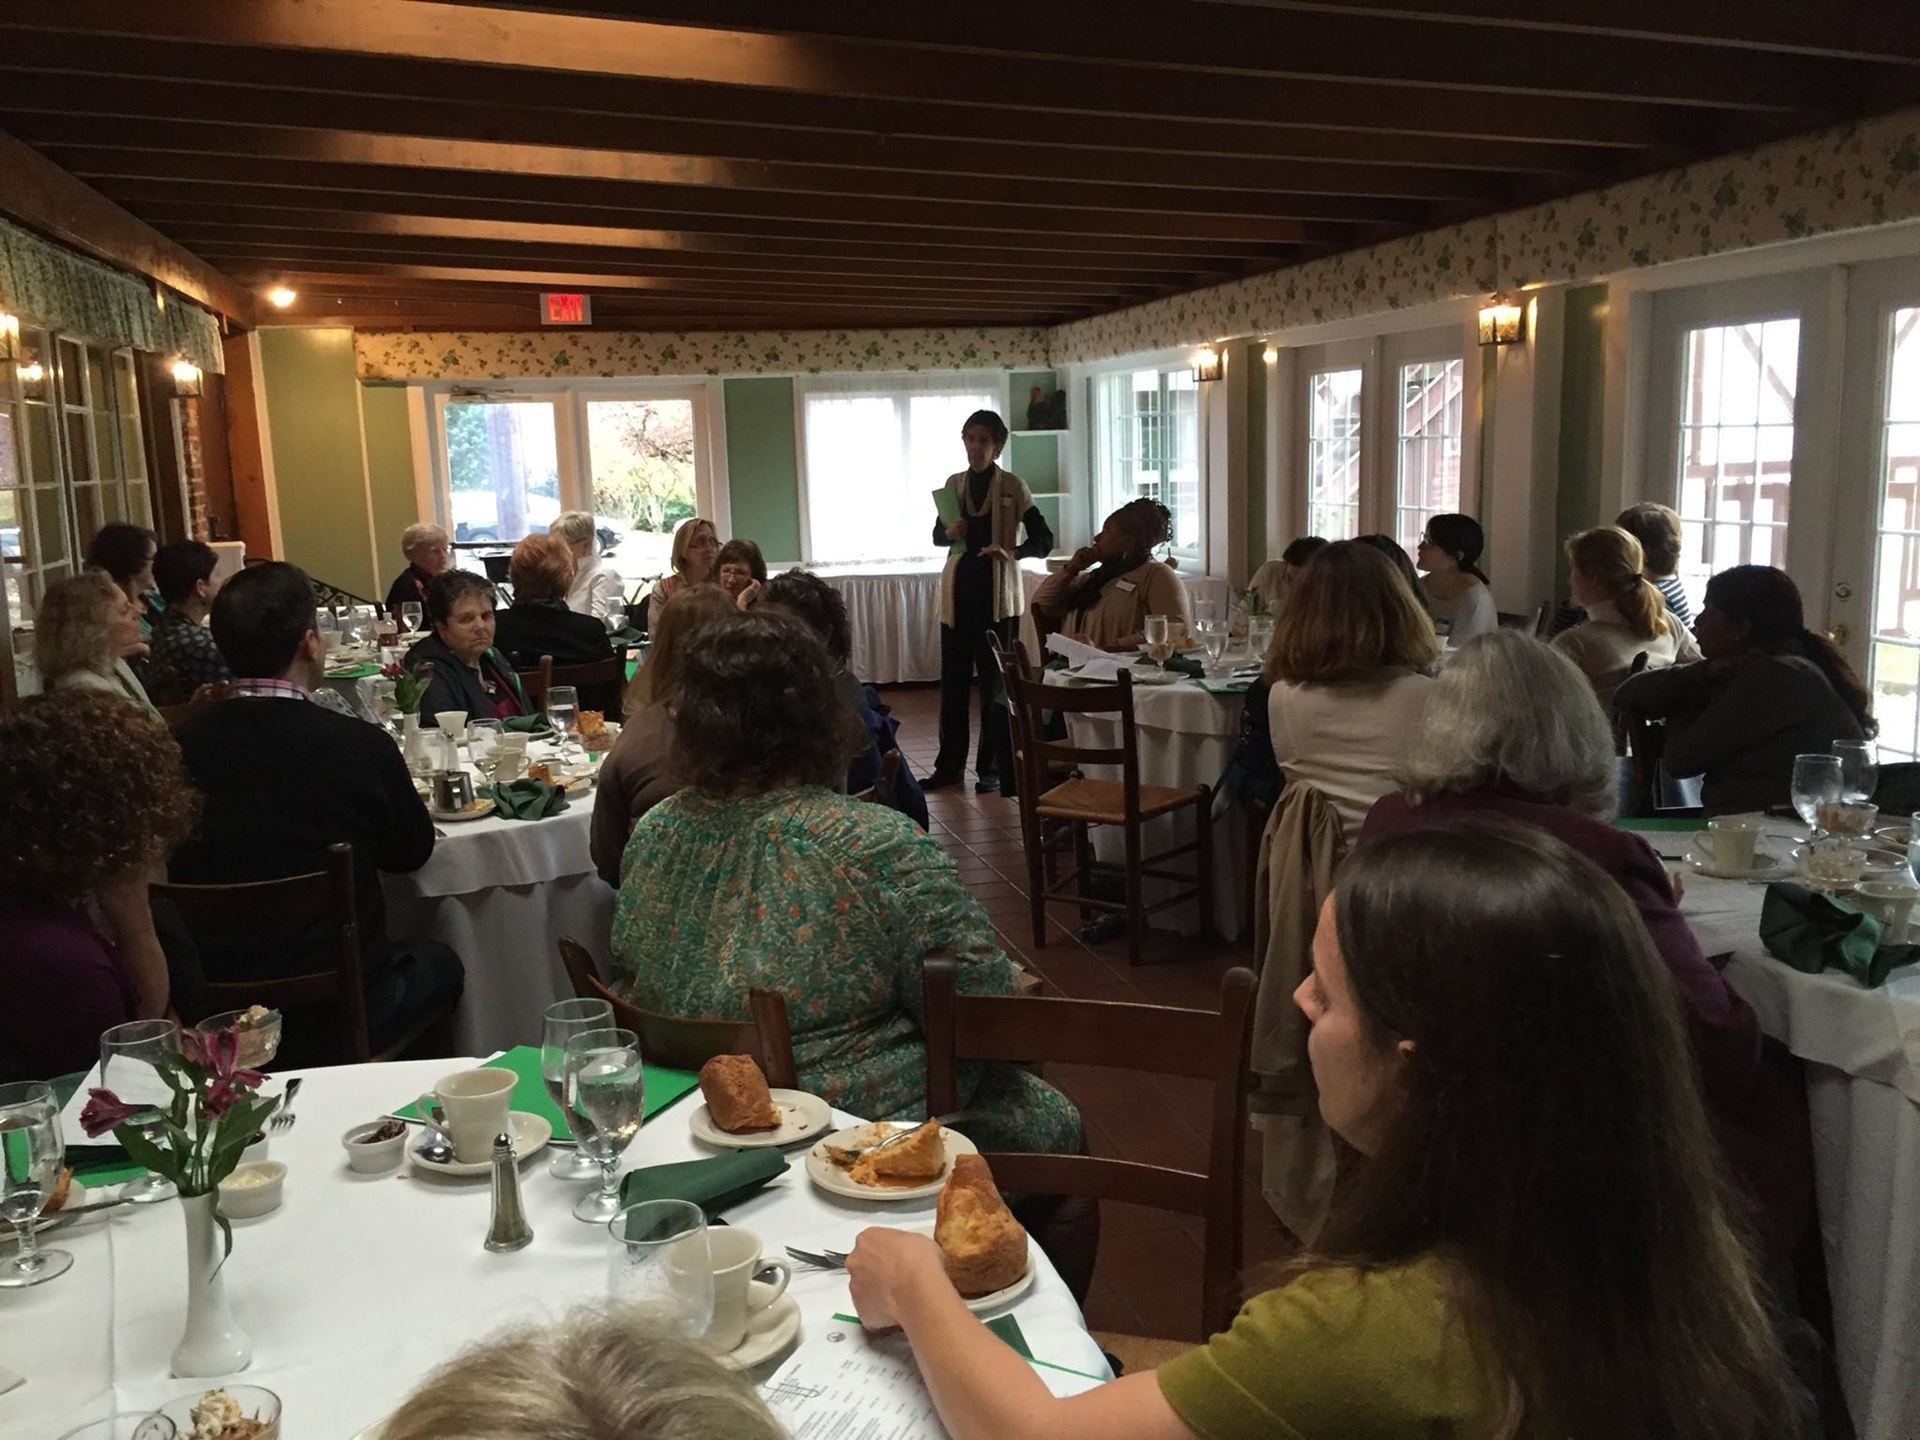 Margot Aronson speaking at the Fall 2015 Legislative and Advocacy Program’s luncheon “Everything You Always Wanted To Know About Legislation and Advocacy But Were Afraid To Ask”